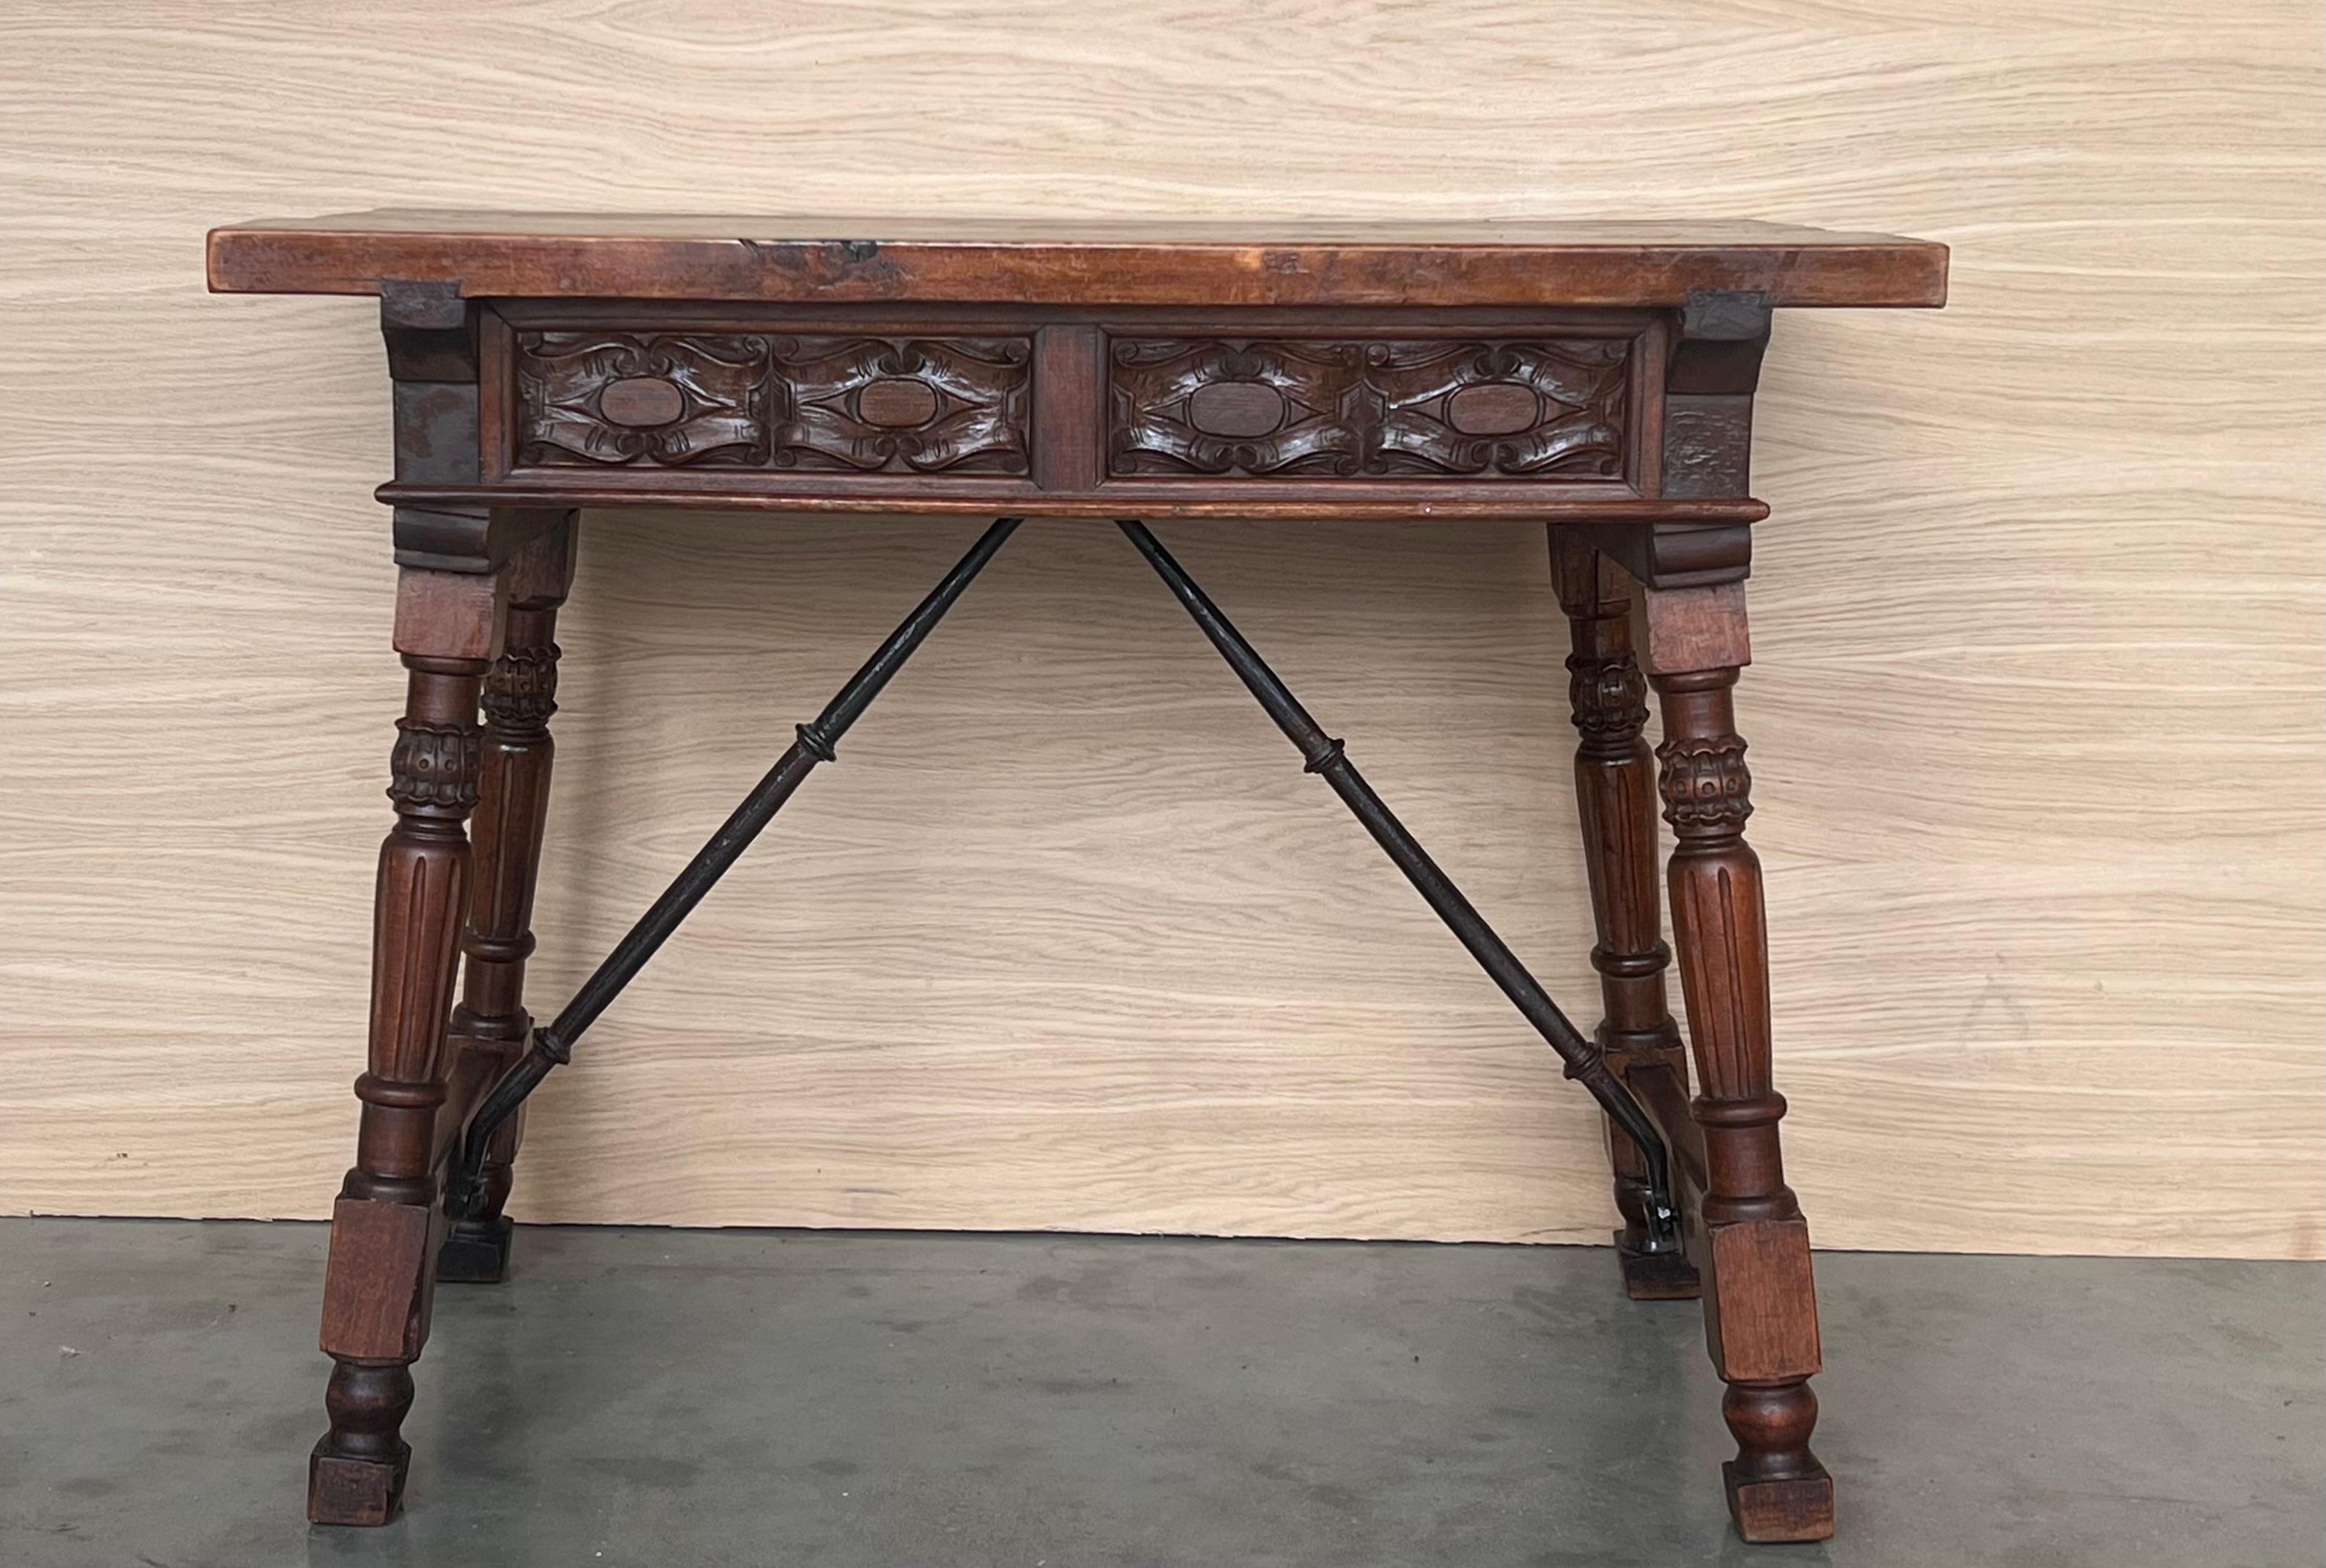 Spanish console table from the 19th century. The rectangular top has two carved sides, the end legs are beautifully carved.
It can be used as a desk, side table, dresser or console.
